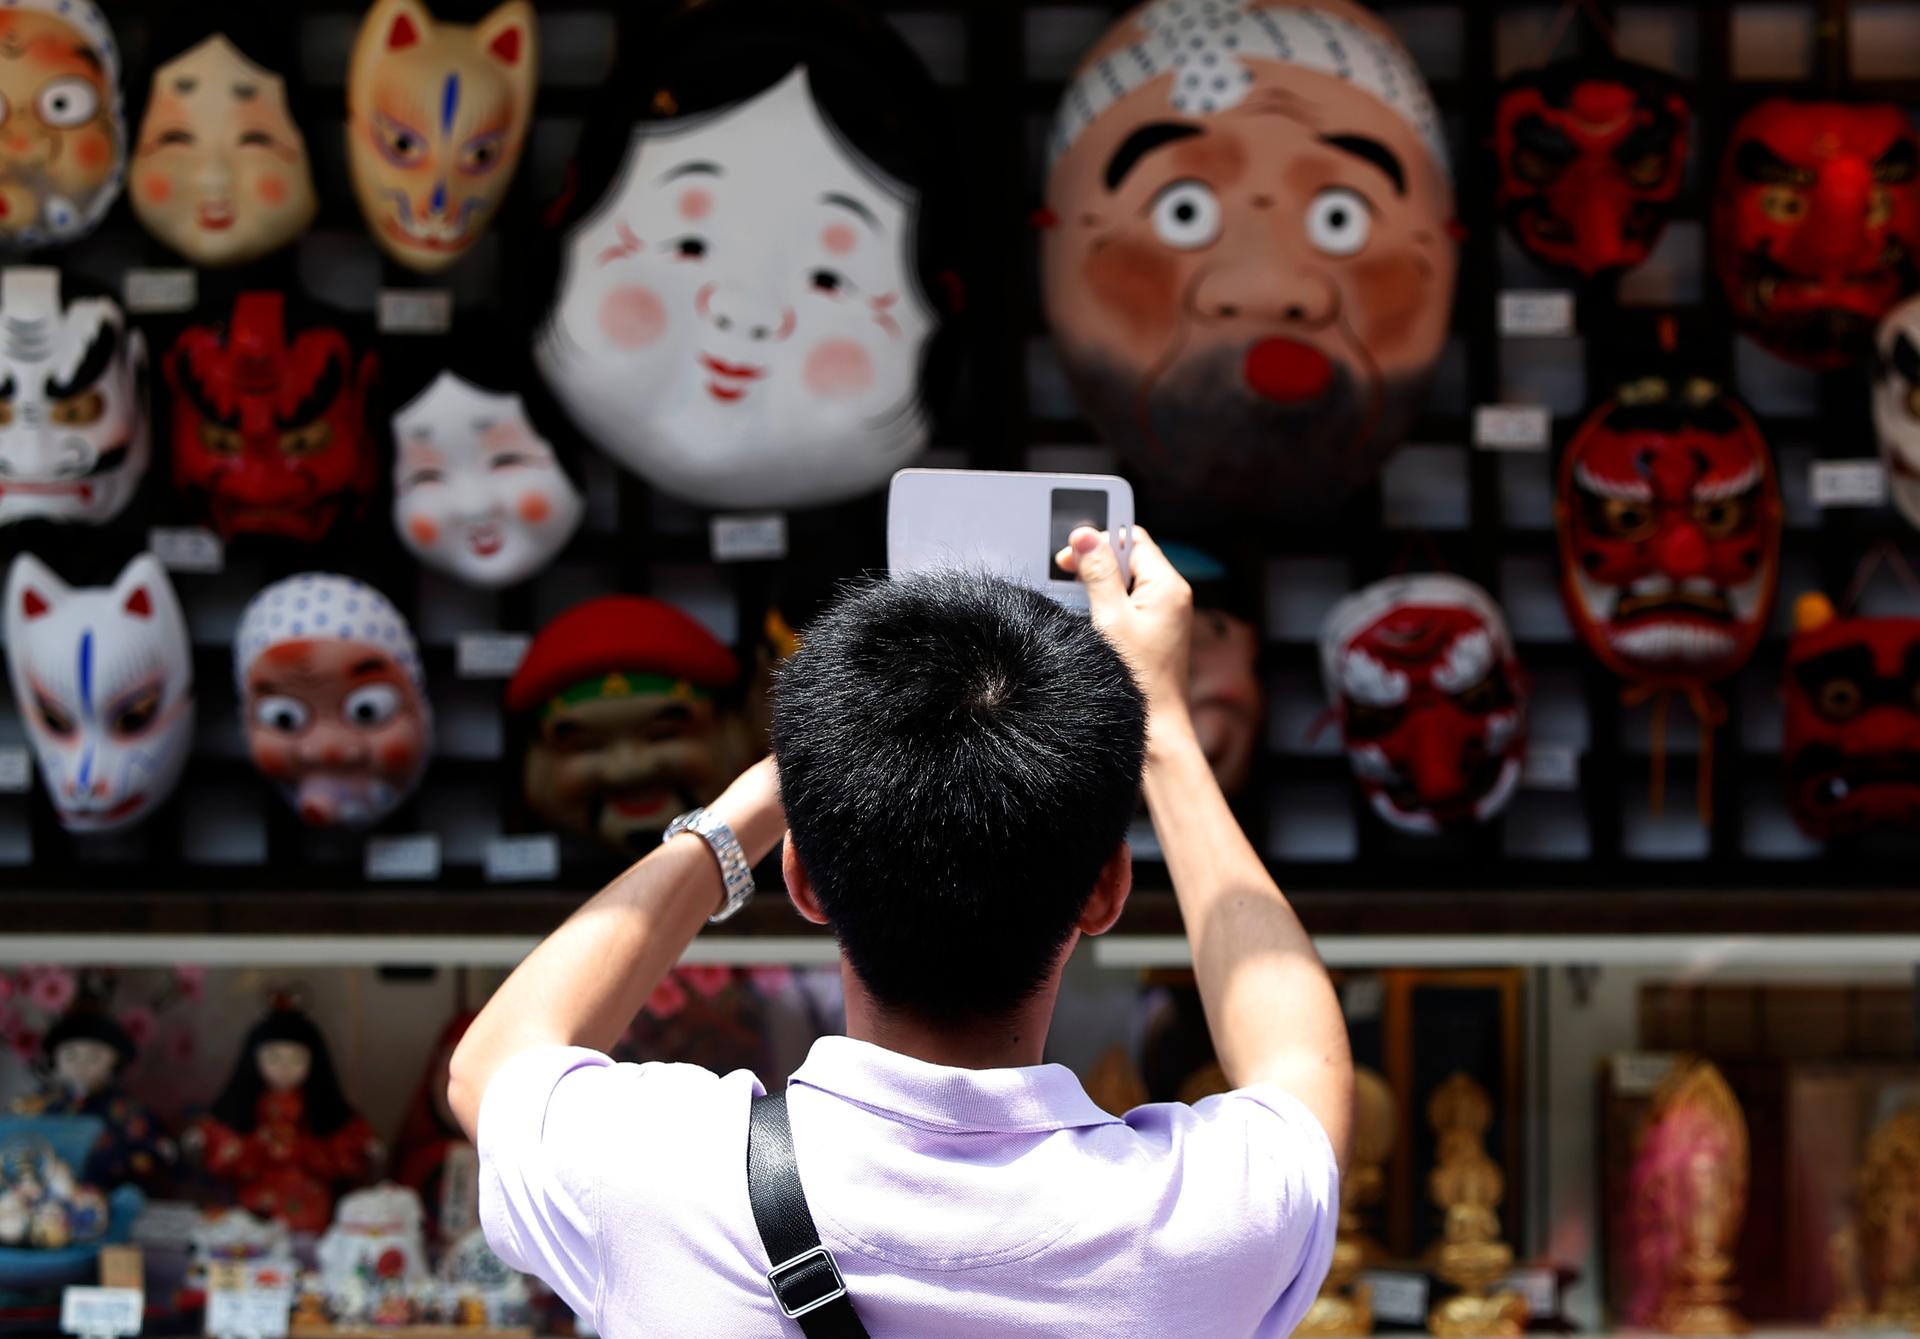 A tourist from China takes pictures of Japanese traditional masks at a souvenir shop in Asakusa district in Tokyo.